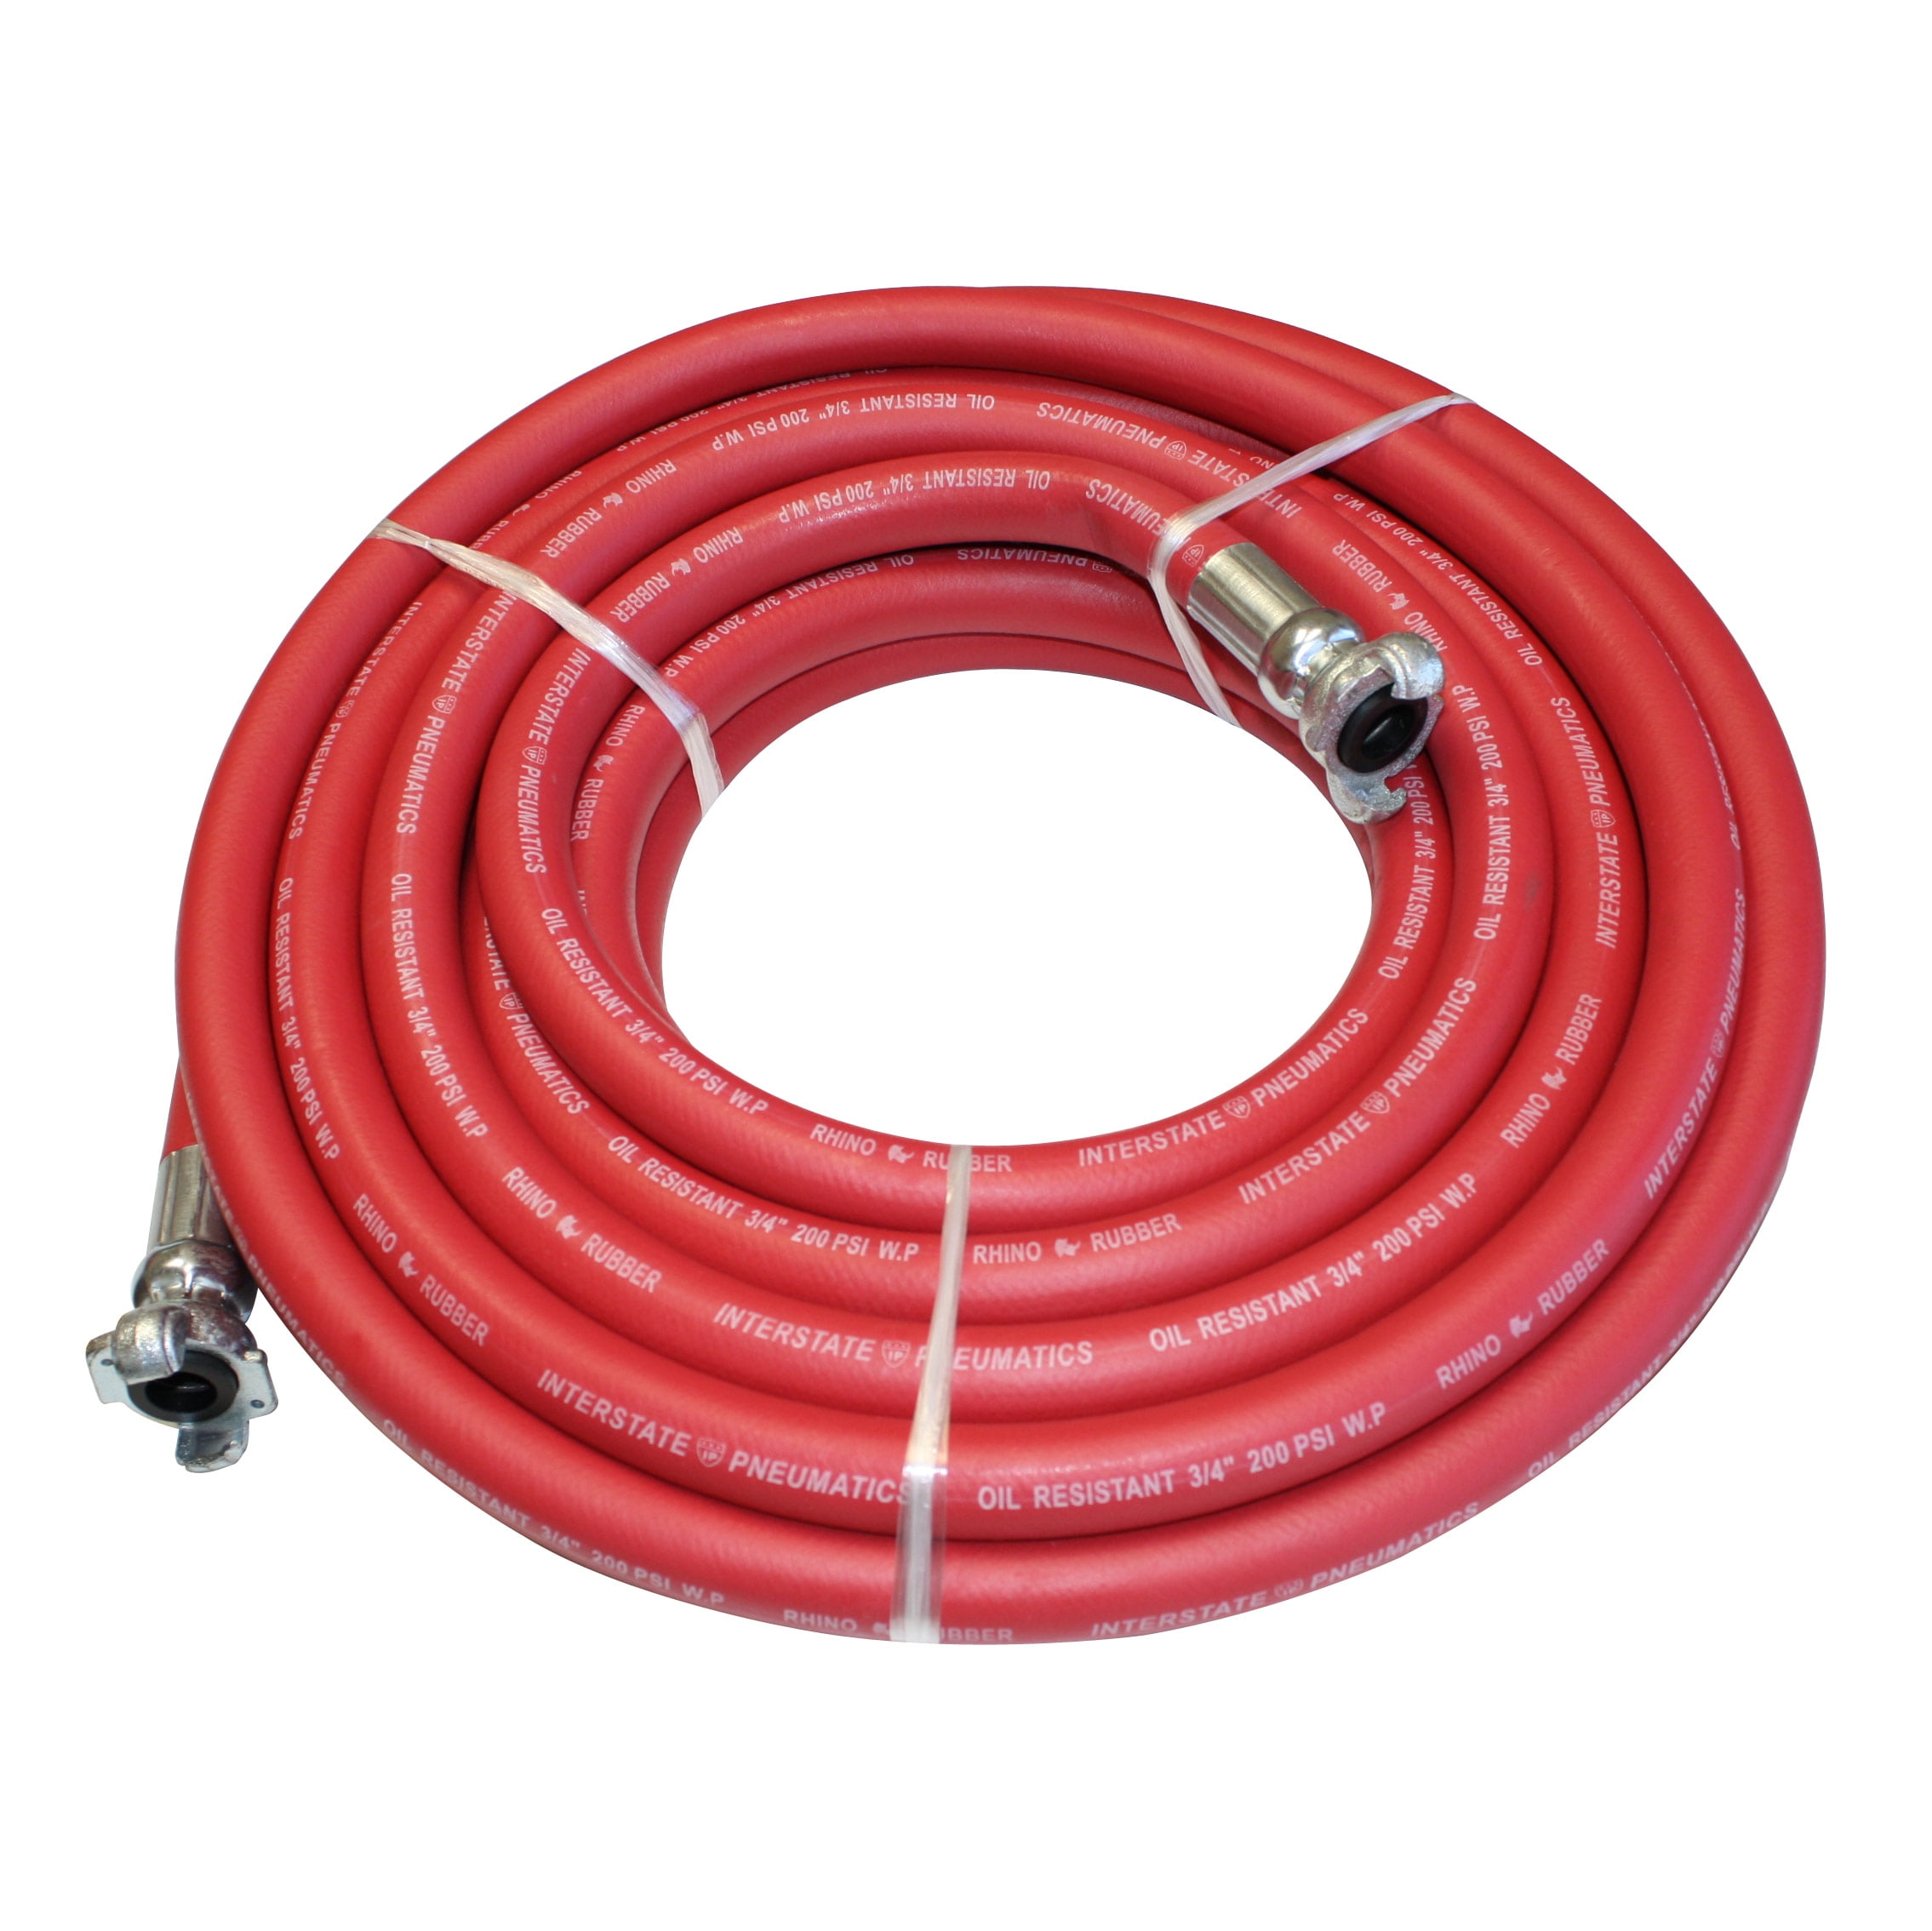 Interstate Pneumatics TW100 12 Inch Red Hose Whip for Inflator for sale online 